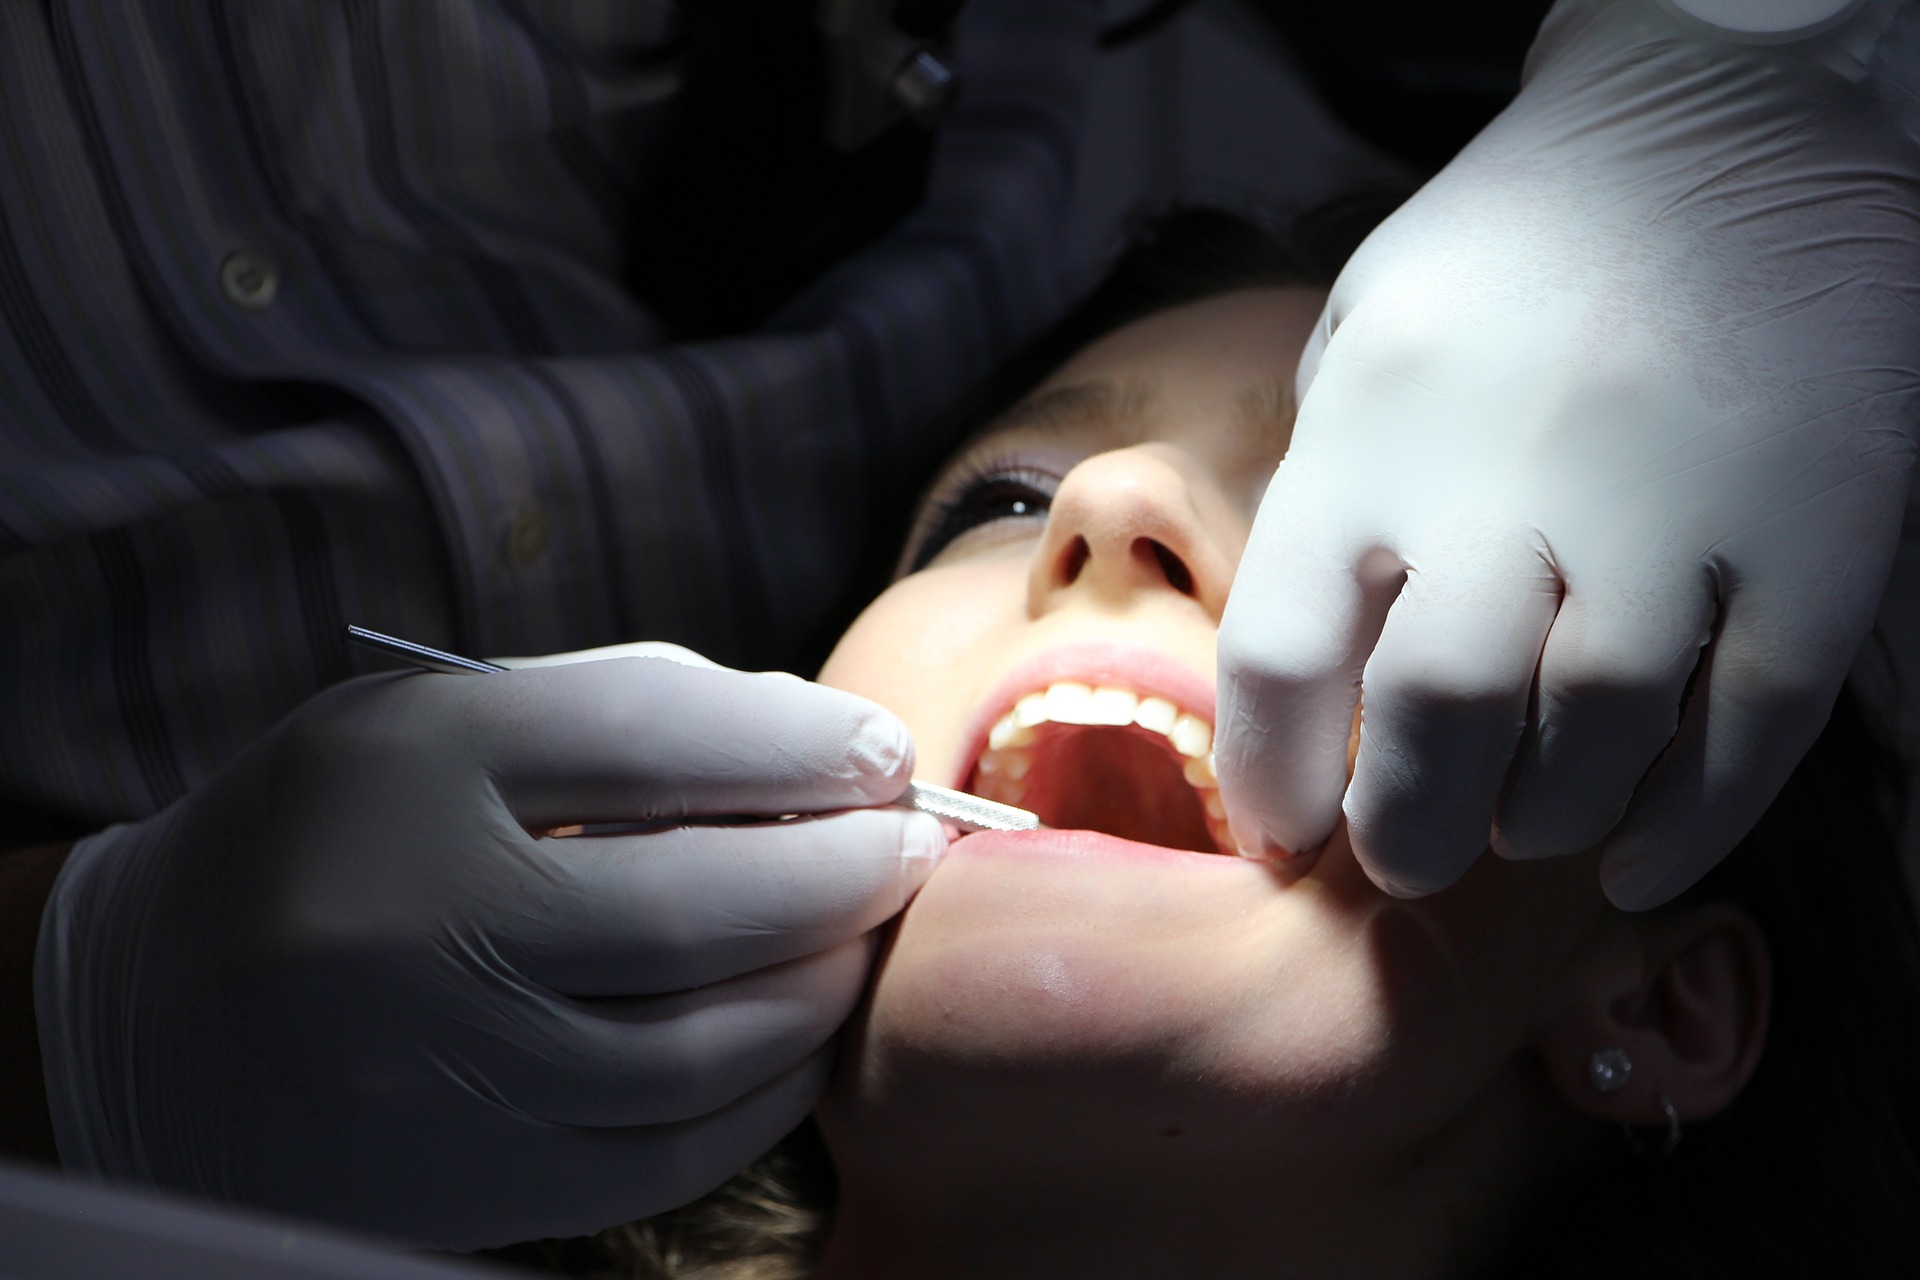 Dental work being performed on a patient